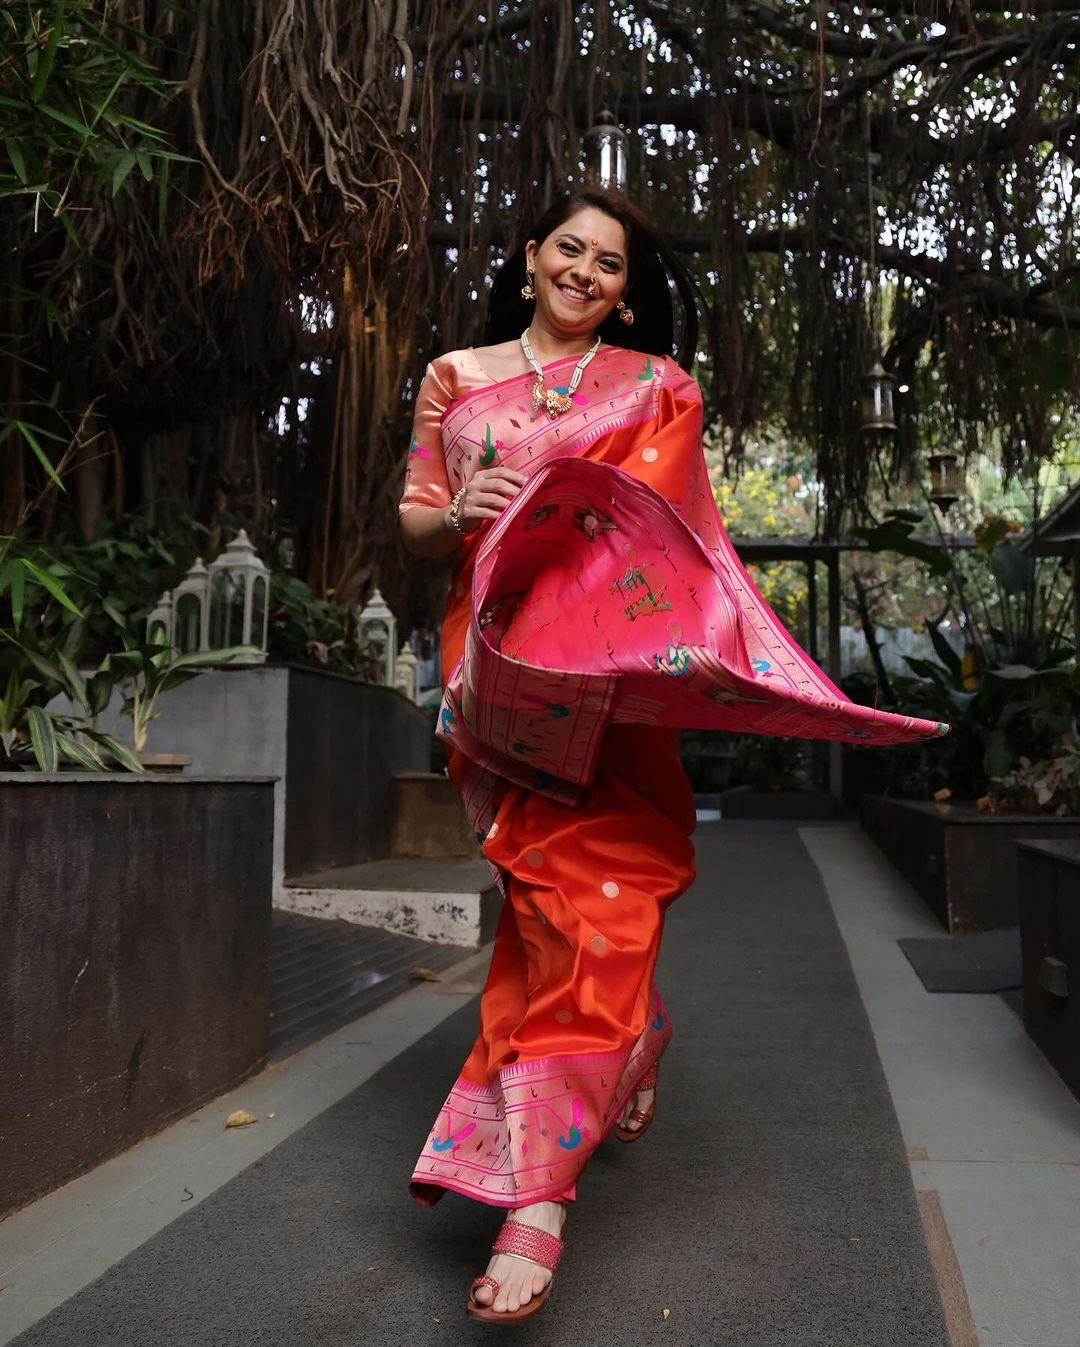 Sonalee Kulkarni is another prominent face of the Marathi industry. Her impeccable acting skills have helped her make a name in the industry. The actress always wows the audience with her pretty saree looks